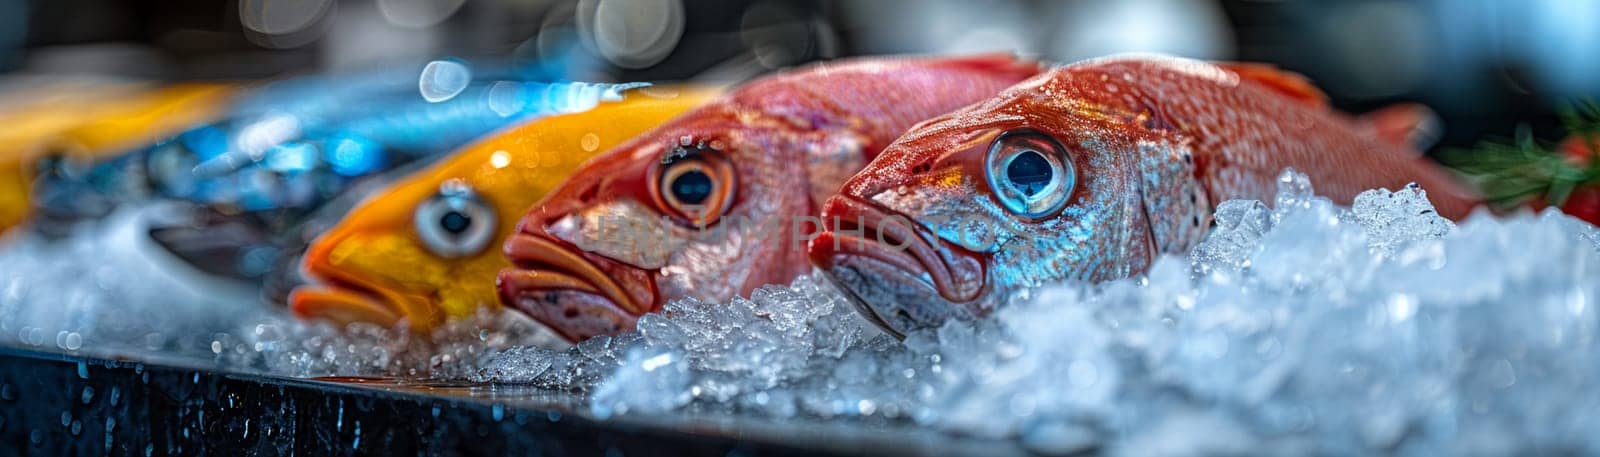 Fresh Fish Market Displays Seas Bounty in Business of Ocean Harvest by Benzoix